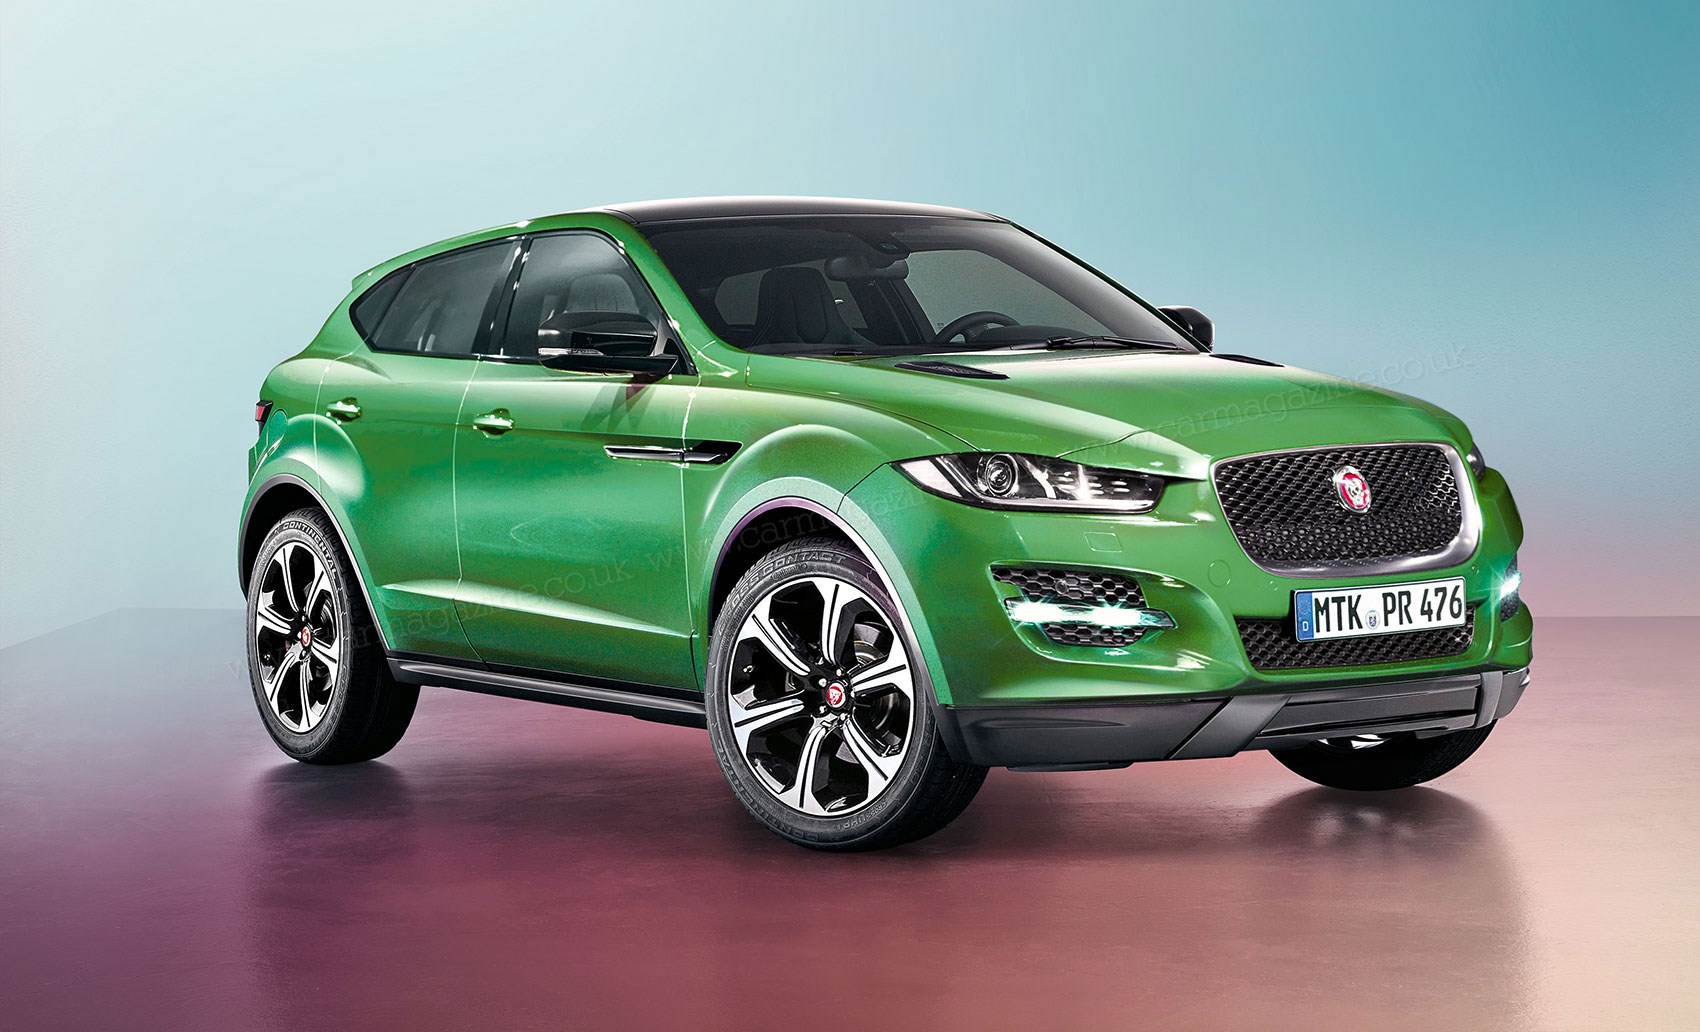 Jaguar E-Pace revealed: the big cat's first EV will also be an SUV